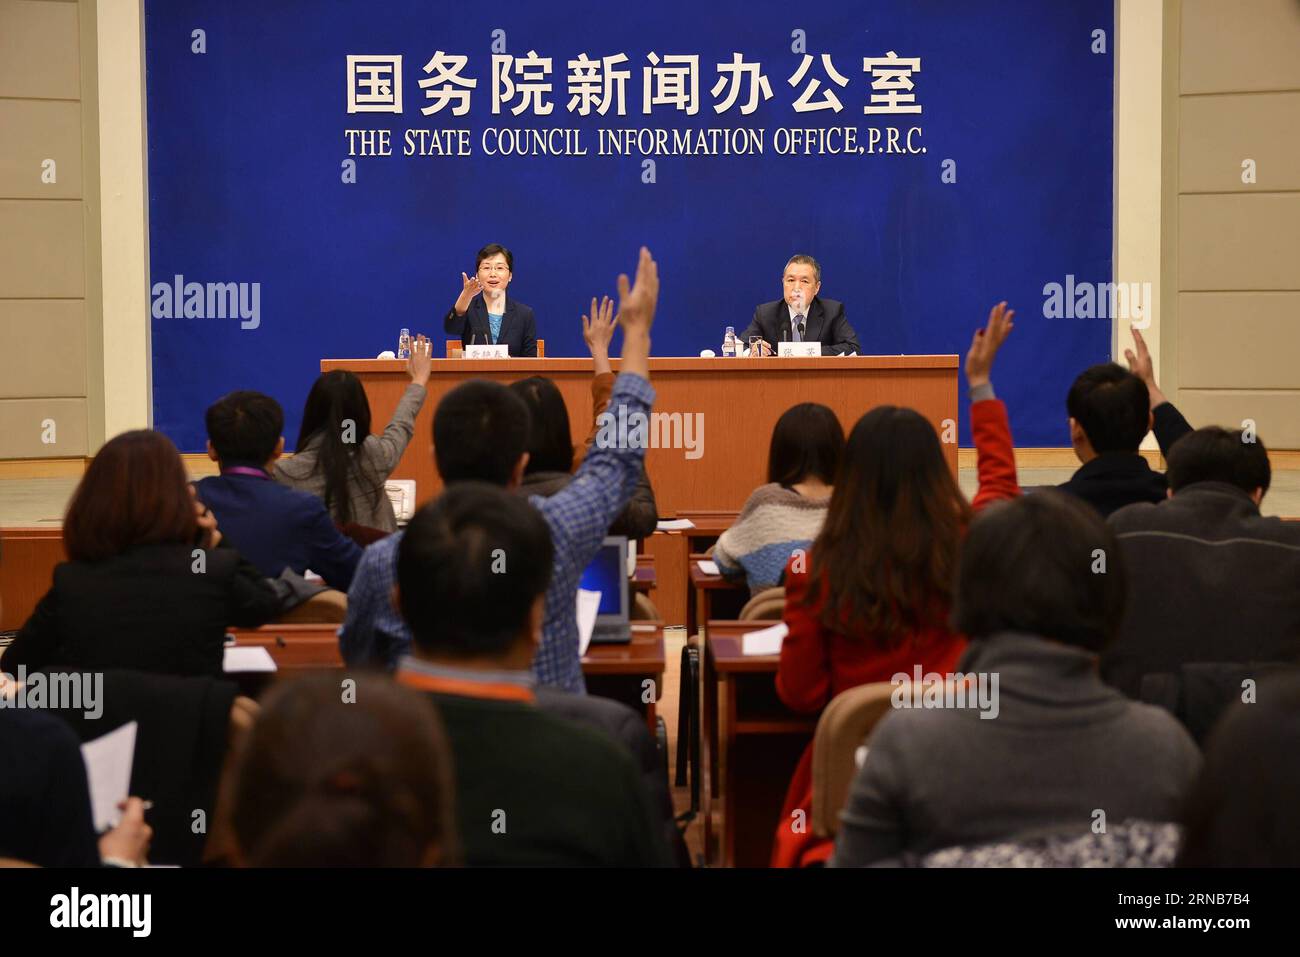 (160222) -- BEIJING, Feb. 22, 2016 -- Zhang Mao (R rear), head of the State Administration for Industry and Commerce, attends a press conference concerning China s business system reform held by the State Council Information Office in Beijing, capital of China, Feb. 22, 2016. ) (wyl) CHINA-BEIJING-BUSINESS-SYSTEM REFORM-PRESS CONFERENCE (CN) LixXin PUBLICATIONxNOTxINxCHN   Beijing Feb 22 2016 Zhang Mao r Rear Head of The State Administration for Industry and Commerce Attends a Press Conference concerning China S Business System Reform Hero by The State Council Information Office in Beijing Cap Stock Photo